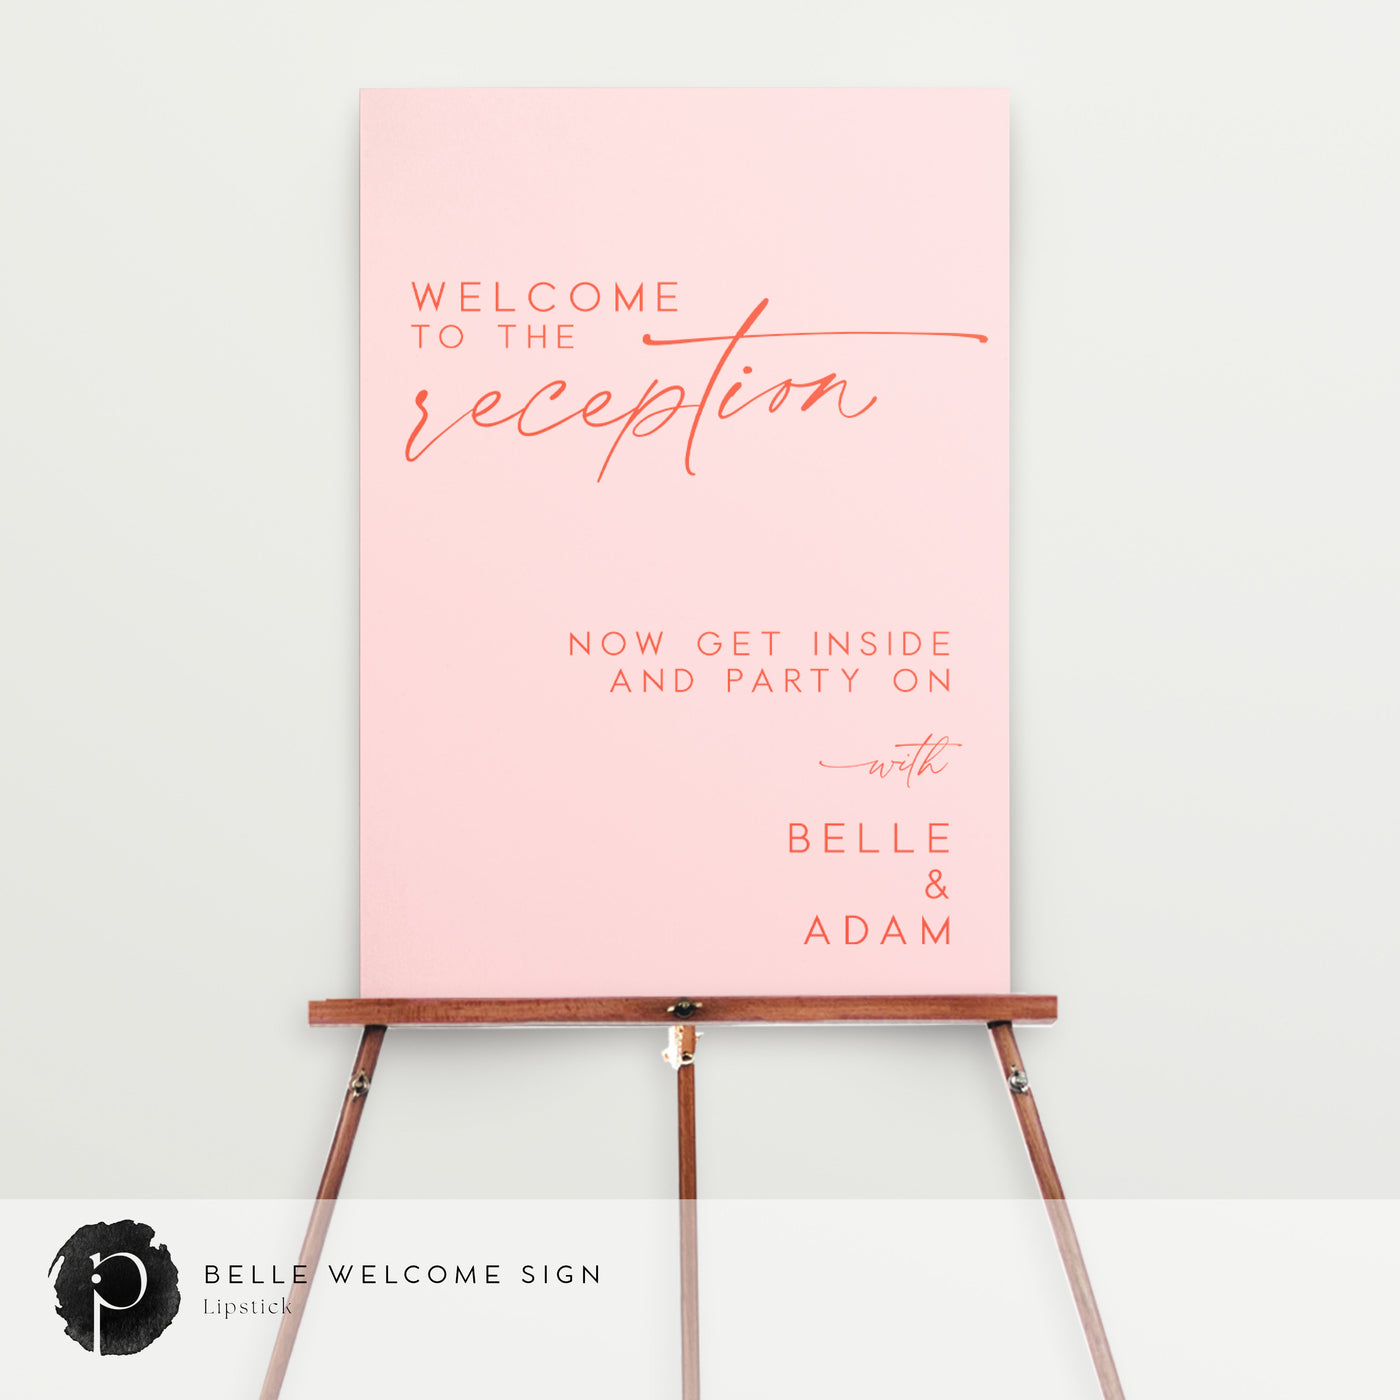 Belle - Welcome Sign